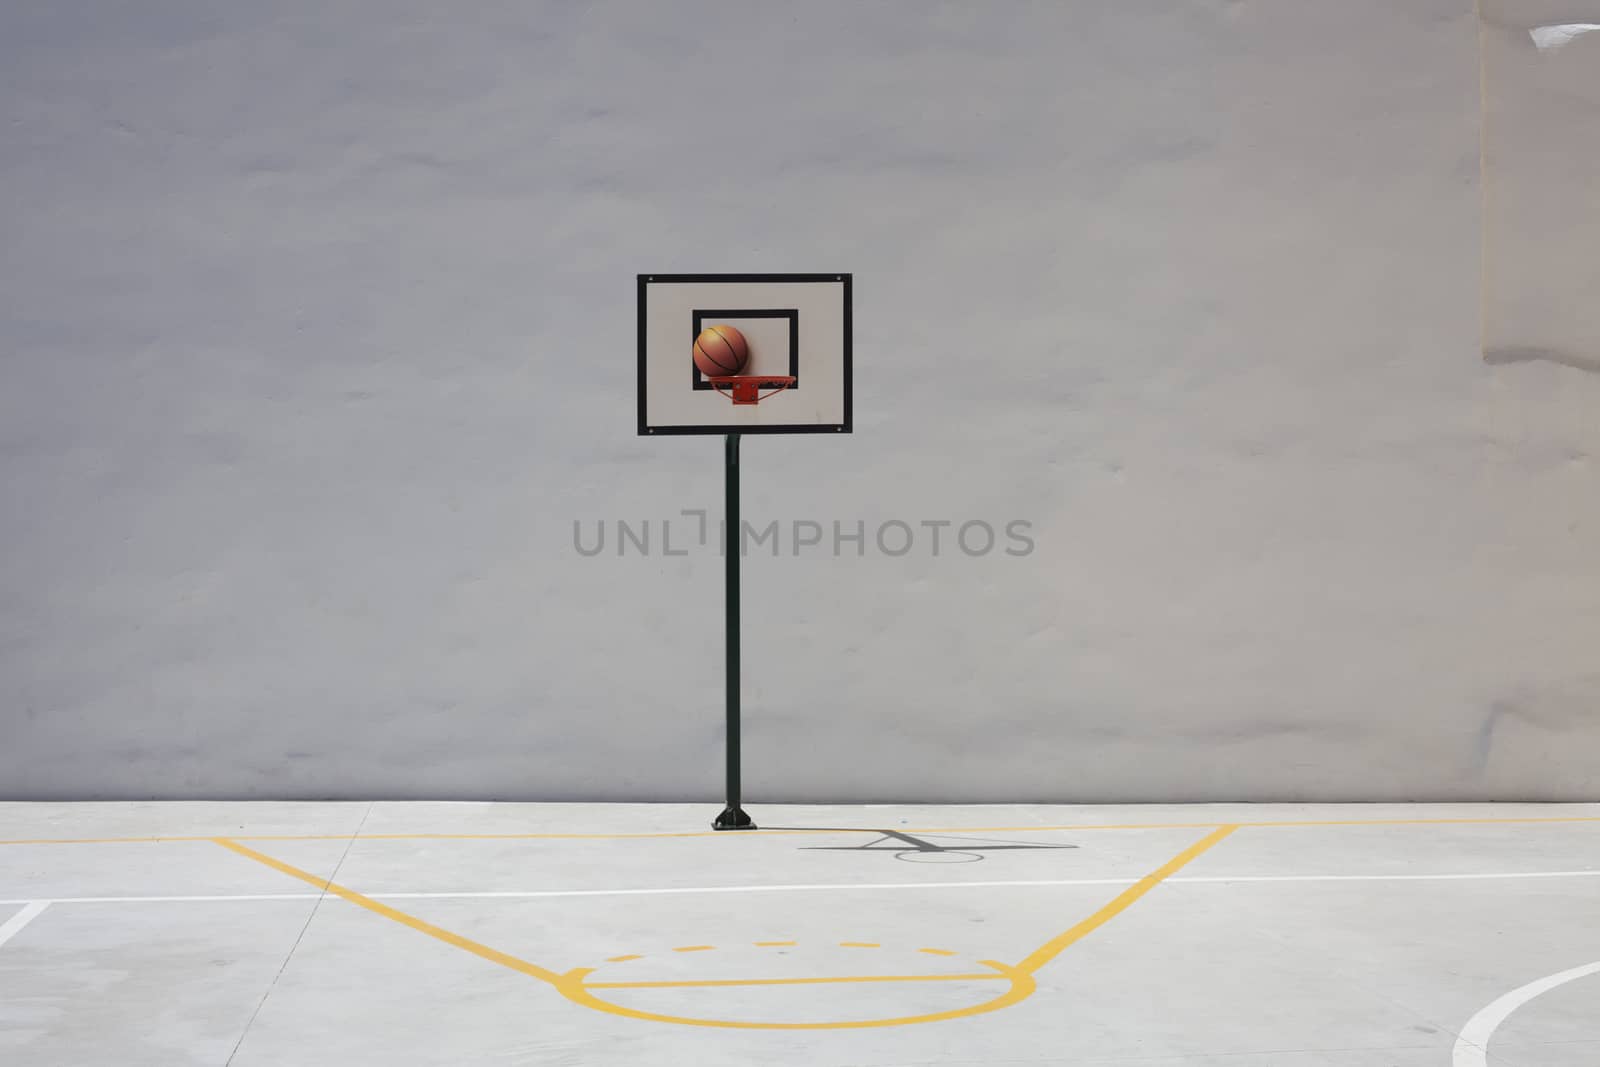 Basketball Hoop and Court With White Backboard with Room for Copy